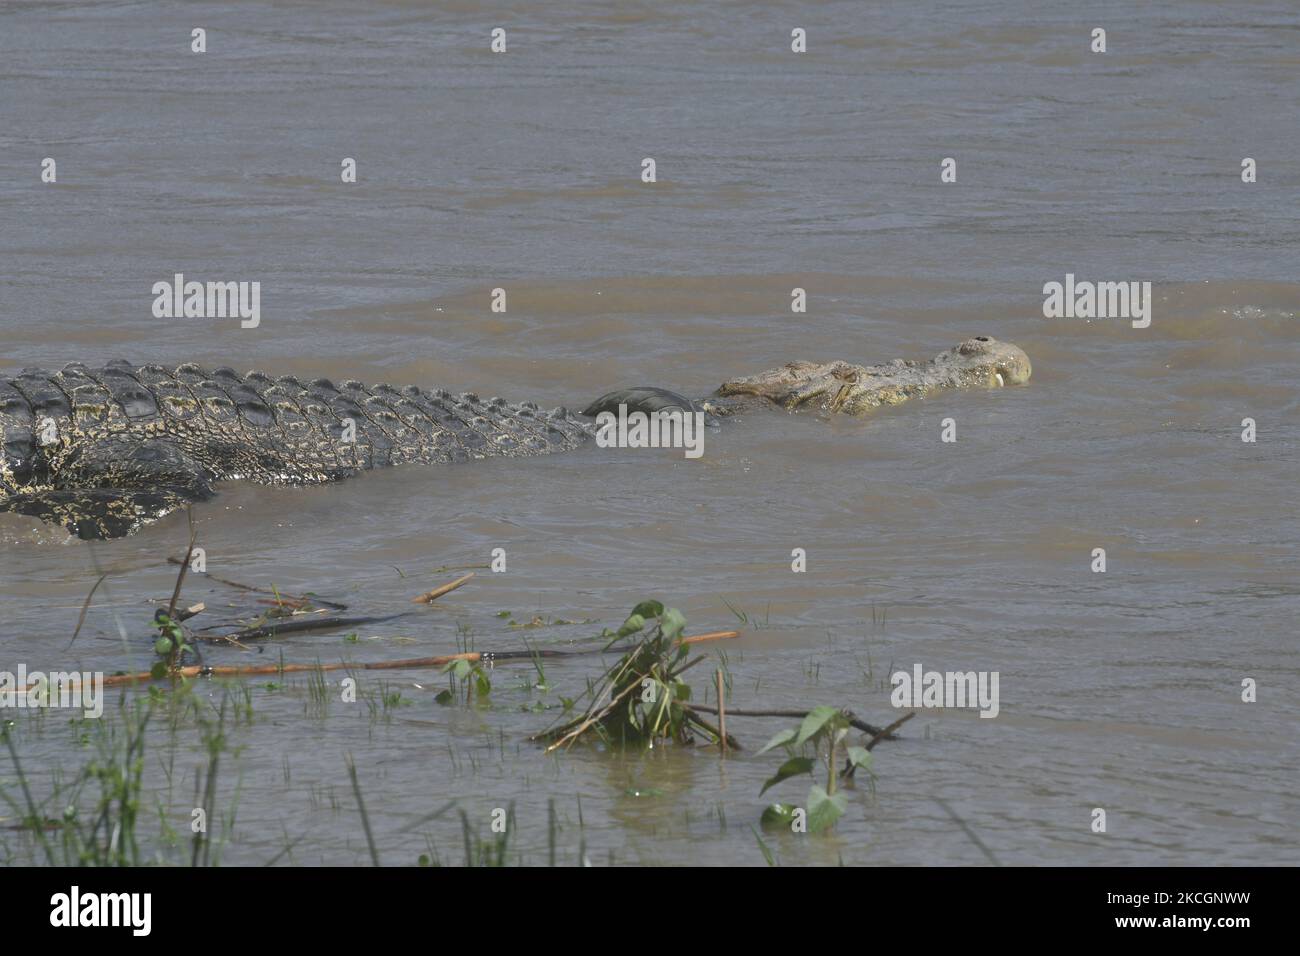 A wild crocodile caught in a used motorcycle tire appears around a river in Palu City, Central Sulawesi Province, Indonesia, on July 1, 2021. The crocodile, which has been entangled in a used motorcycle tire since 2016 and has not been rescued, reappears with a larger body condition and it is feared that the tires that are snaring him are getting pinched. (Photo by Mohamad Hamzah/NurPhoto) Stock Photo